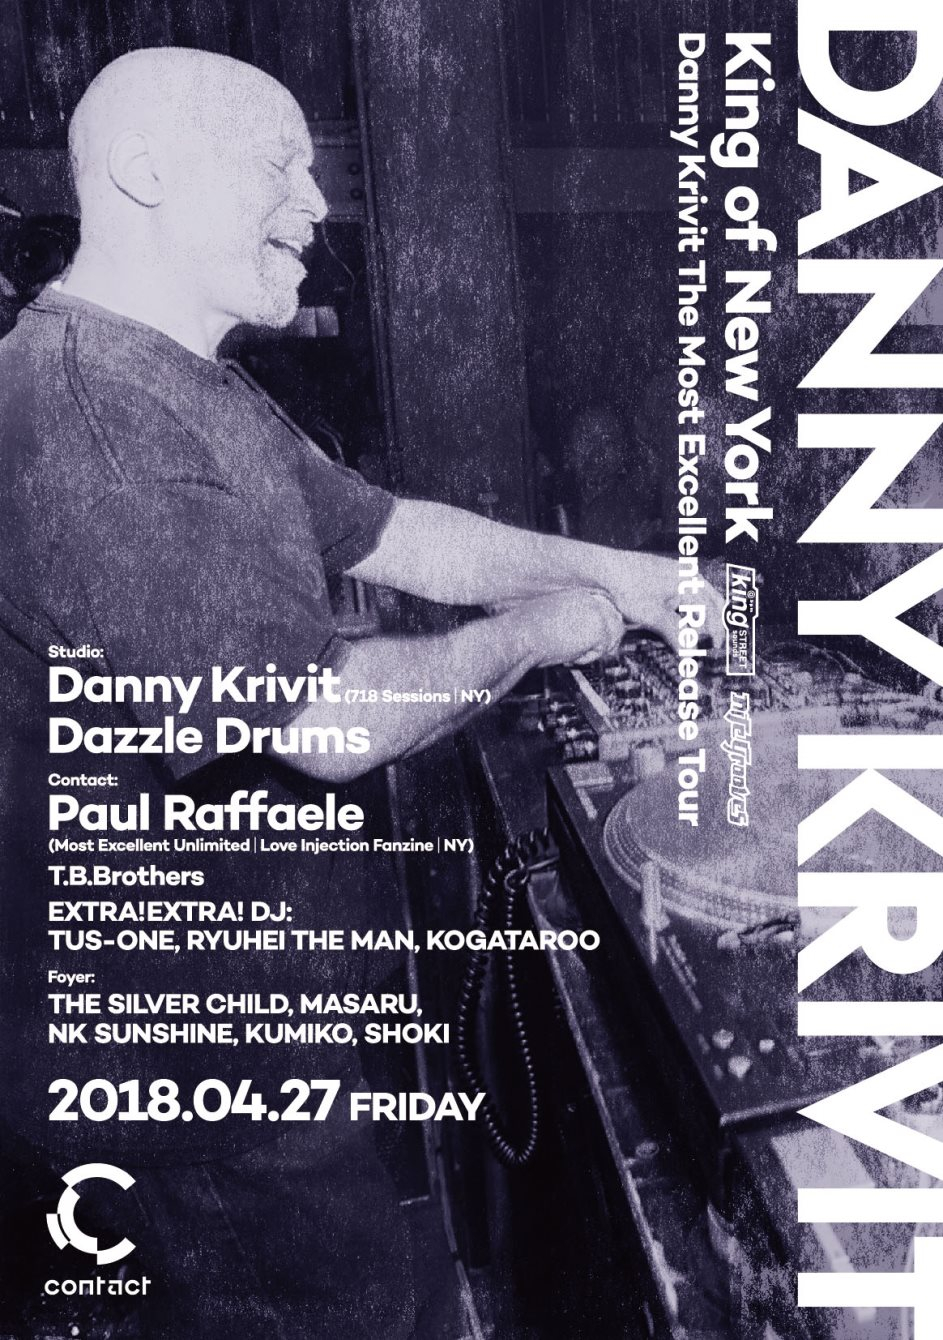 King of New York -Danny Krivit The Most Excellent Release Tour- - Flyer front